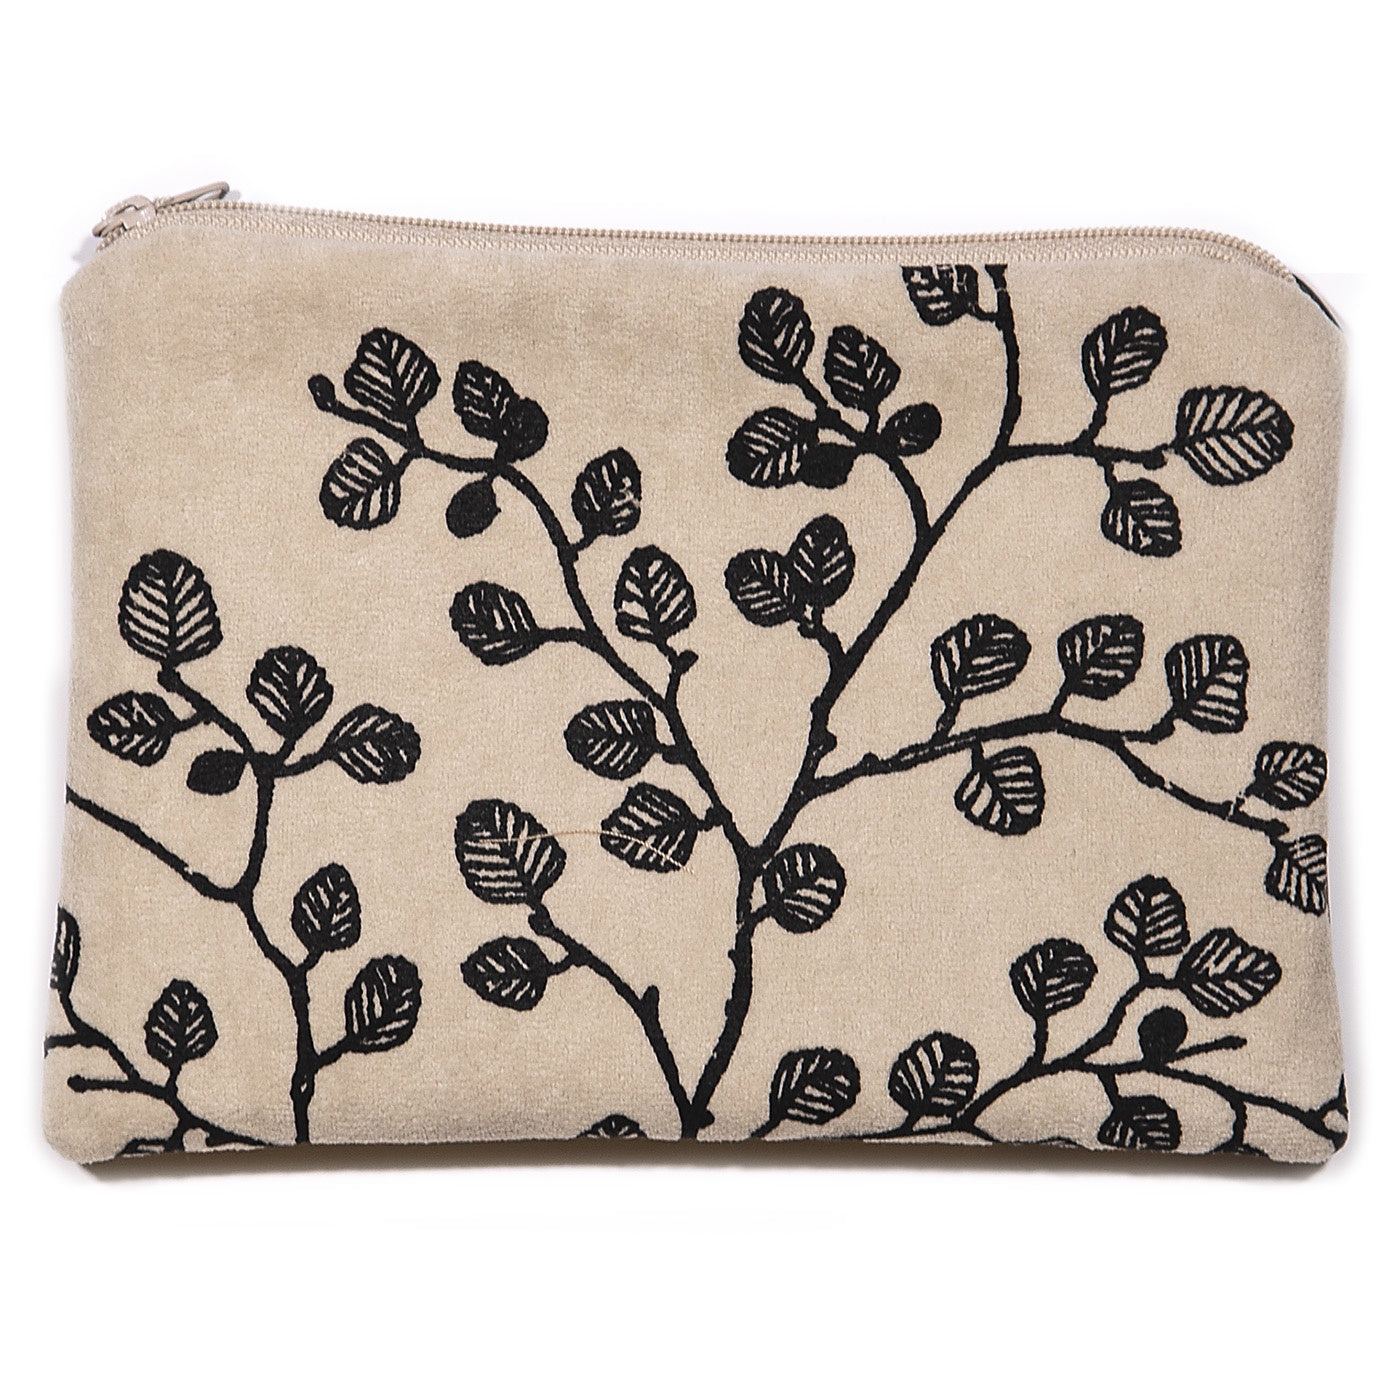 Stalley Textile Co - Zip Purse - Large - Fagus - Black on Cream